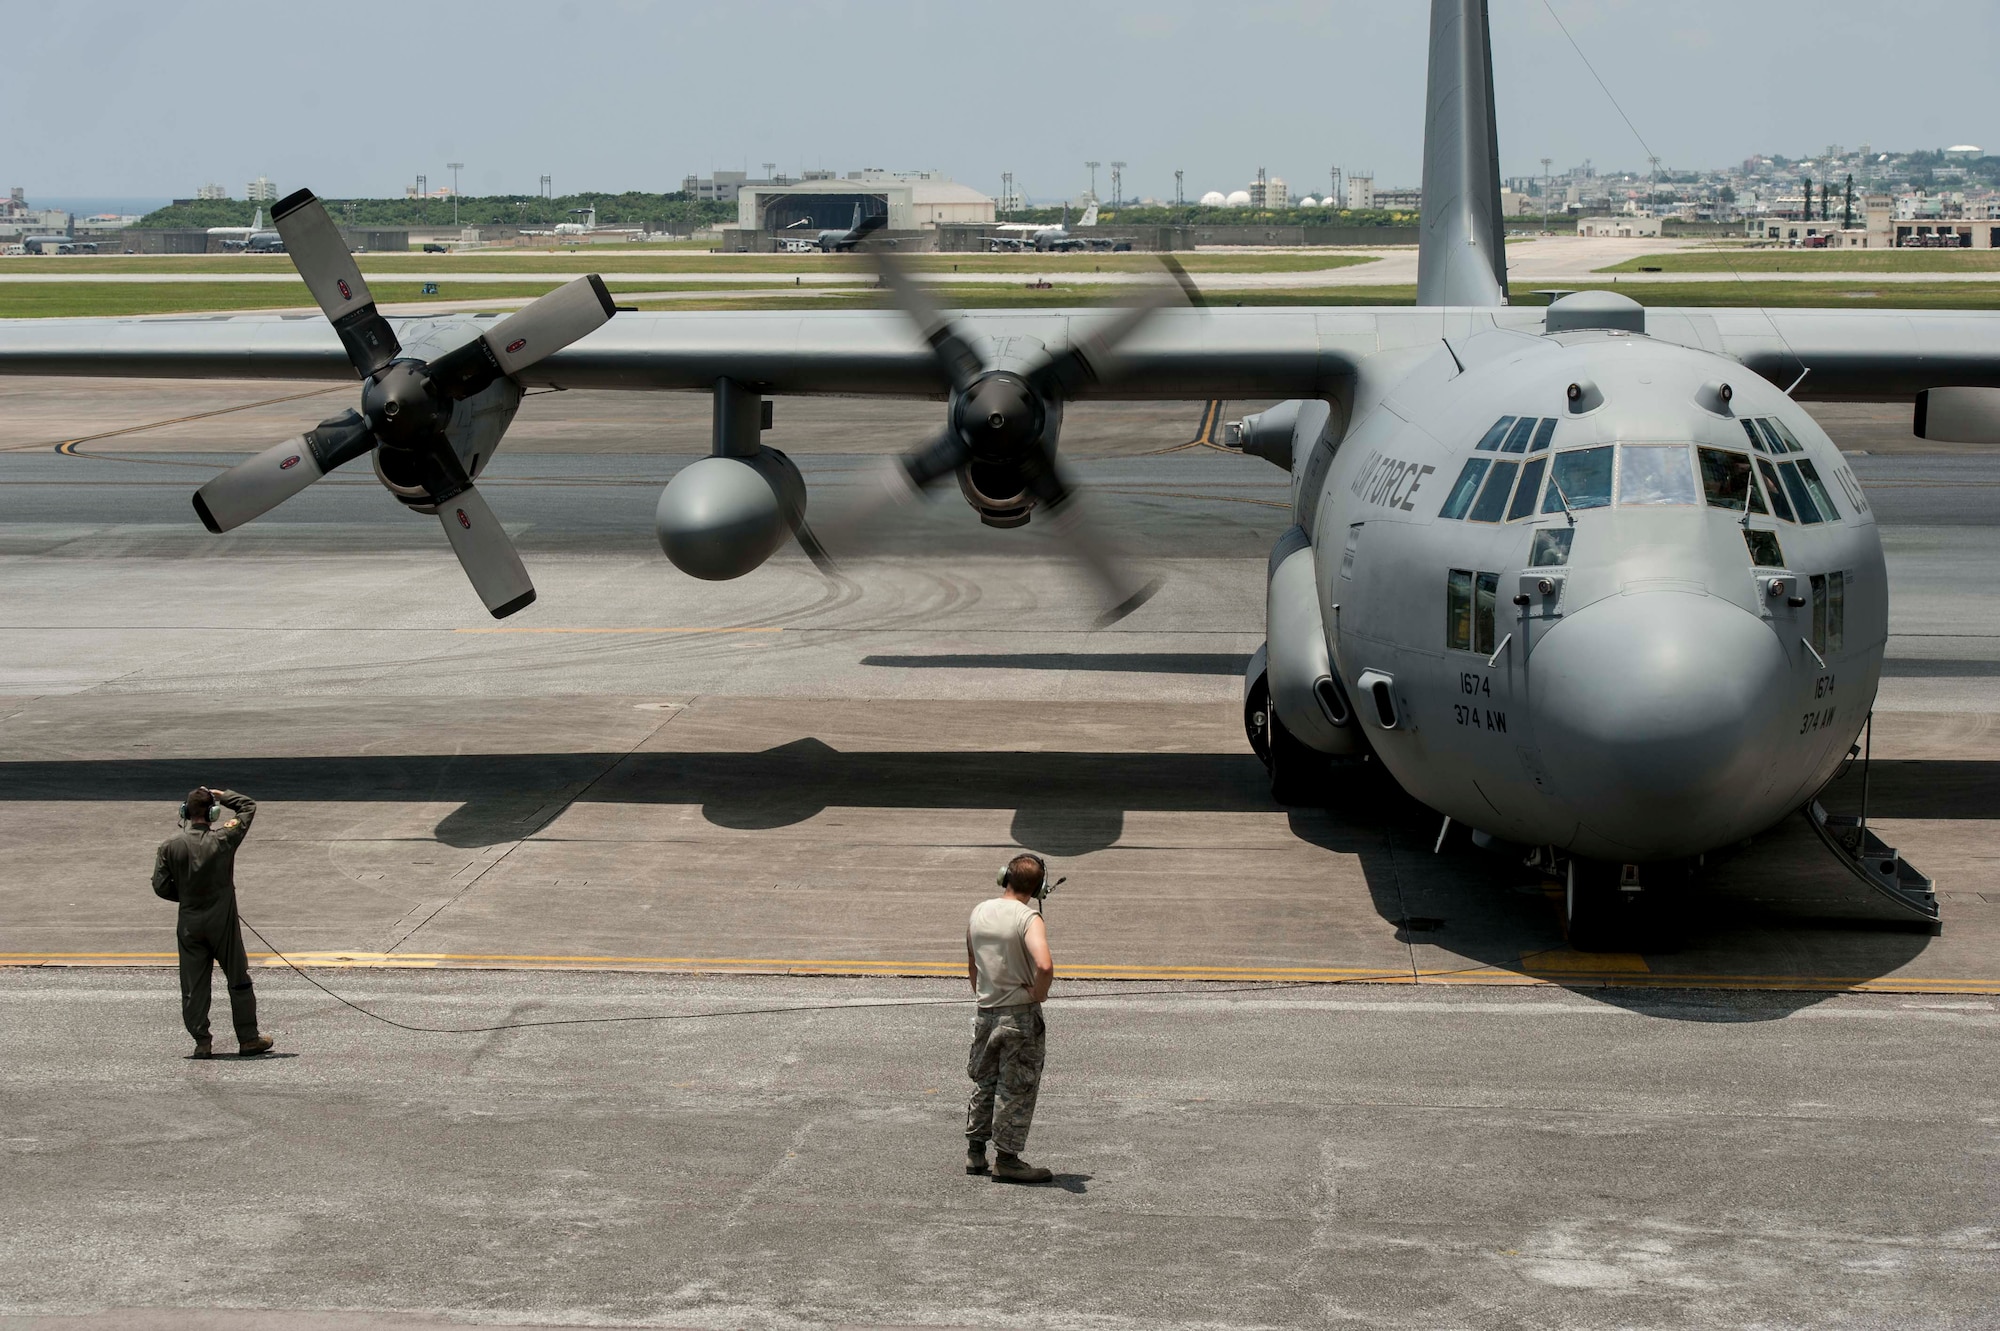 A C-130H Hercules assigned to Yokota Air Base, starts its engines July 28, 2016, at Kadena Air Base, Japan. As the keystone of the Pacific, Kadena AB supports a wide range of contingency and humanitarian operations throughout the Indo-Asia Pacific region. (U.S. Air Force photo by Senior Airman Peter Reft)